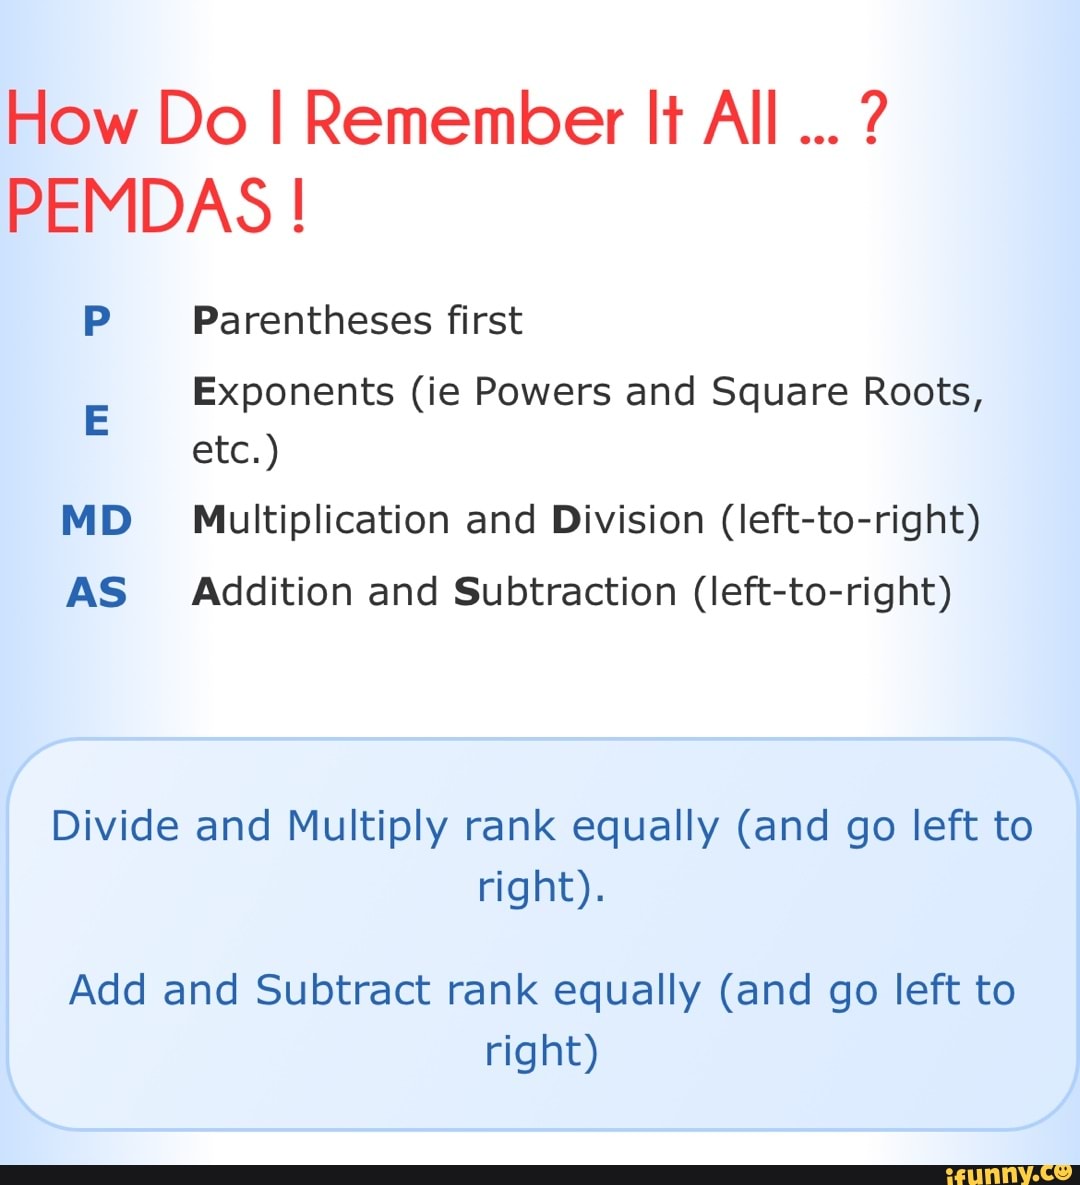 how-do-i-remember-it-all-pemdas-parentheses-first-exponents-ie-powers-and-square-roots-etc